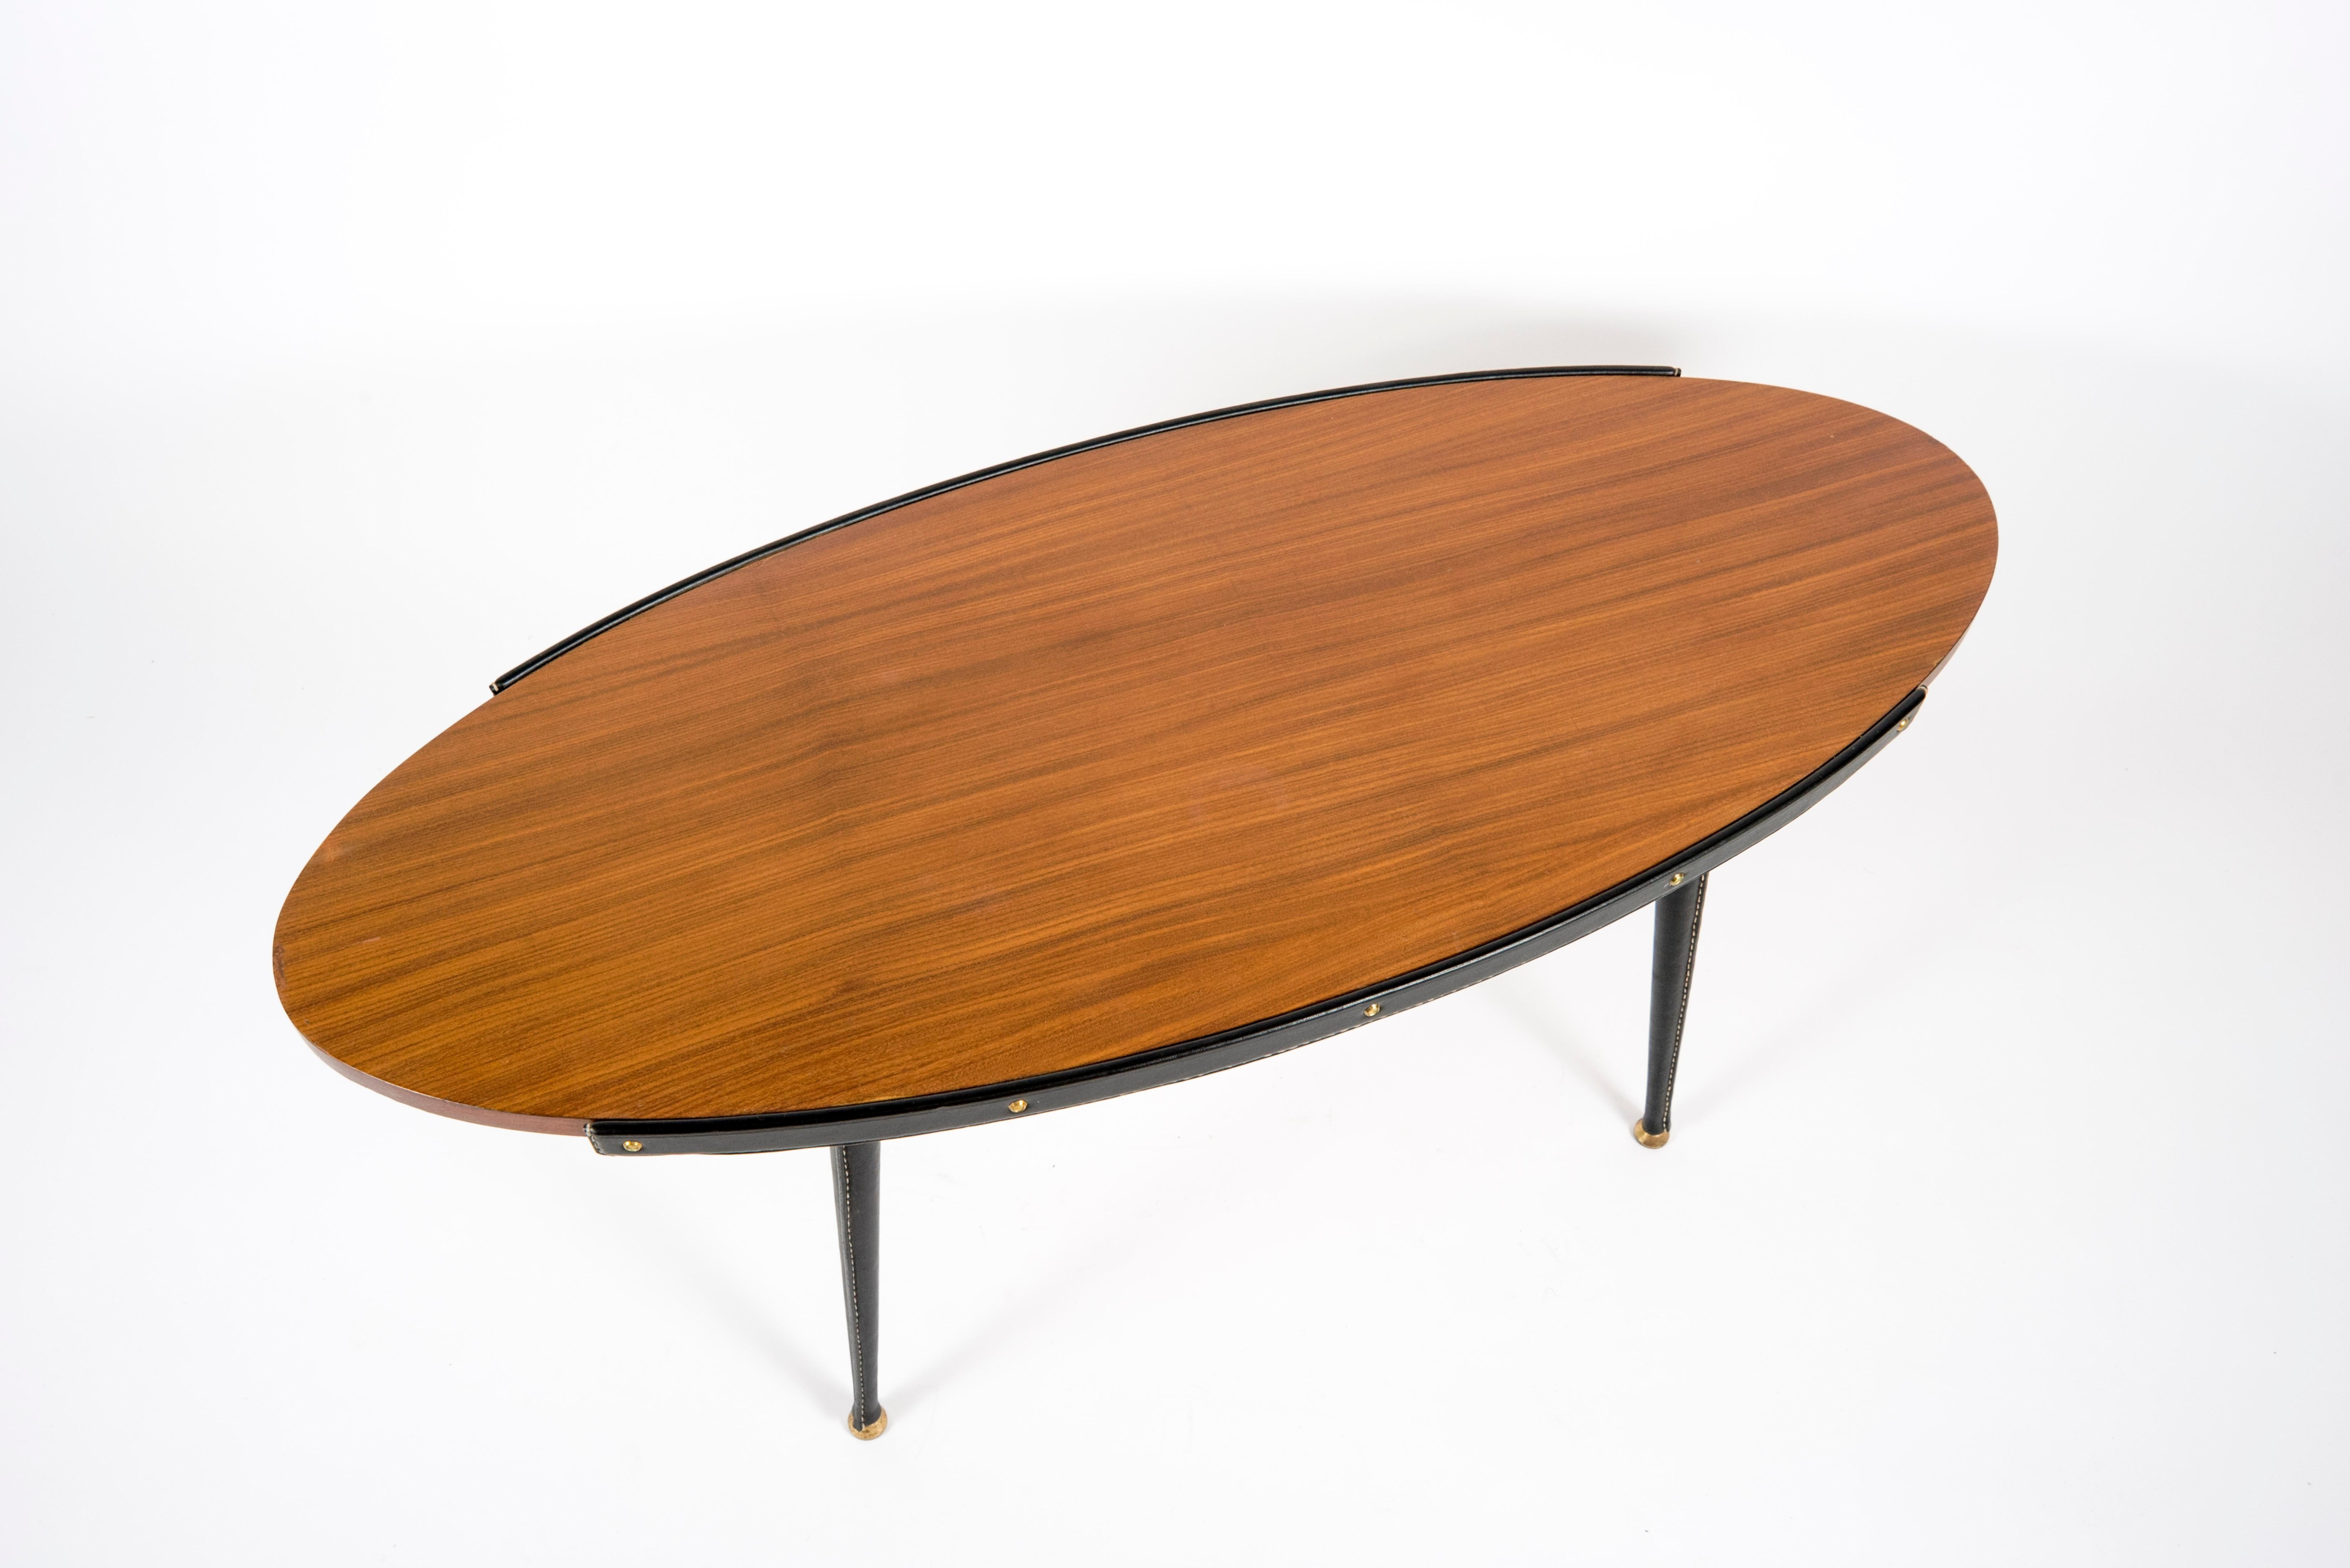 1950's stitched leather cocktail table by Jacques Adnet
France.